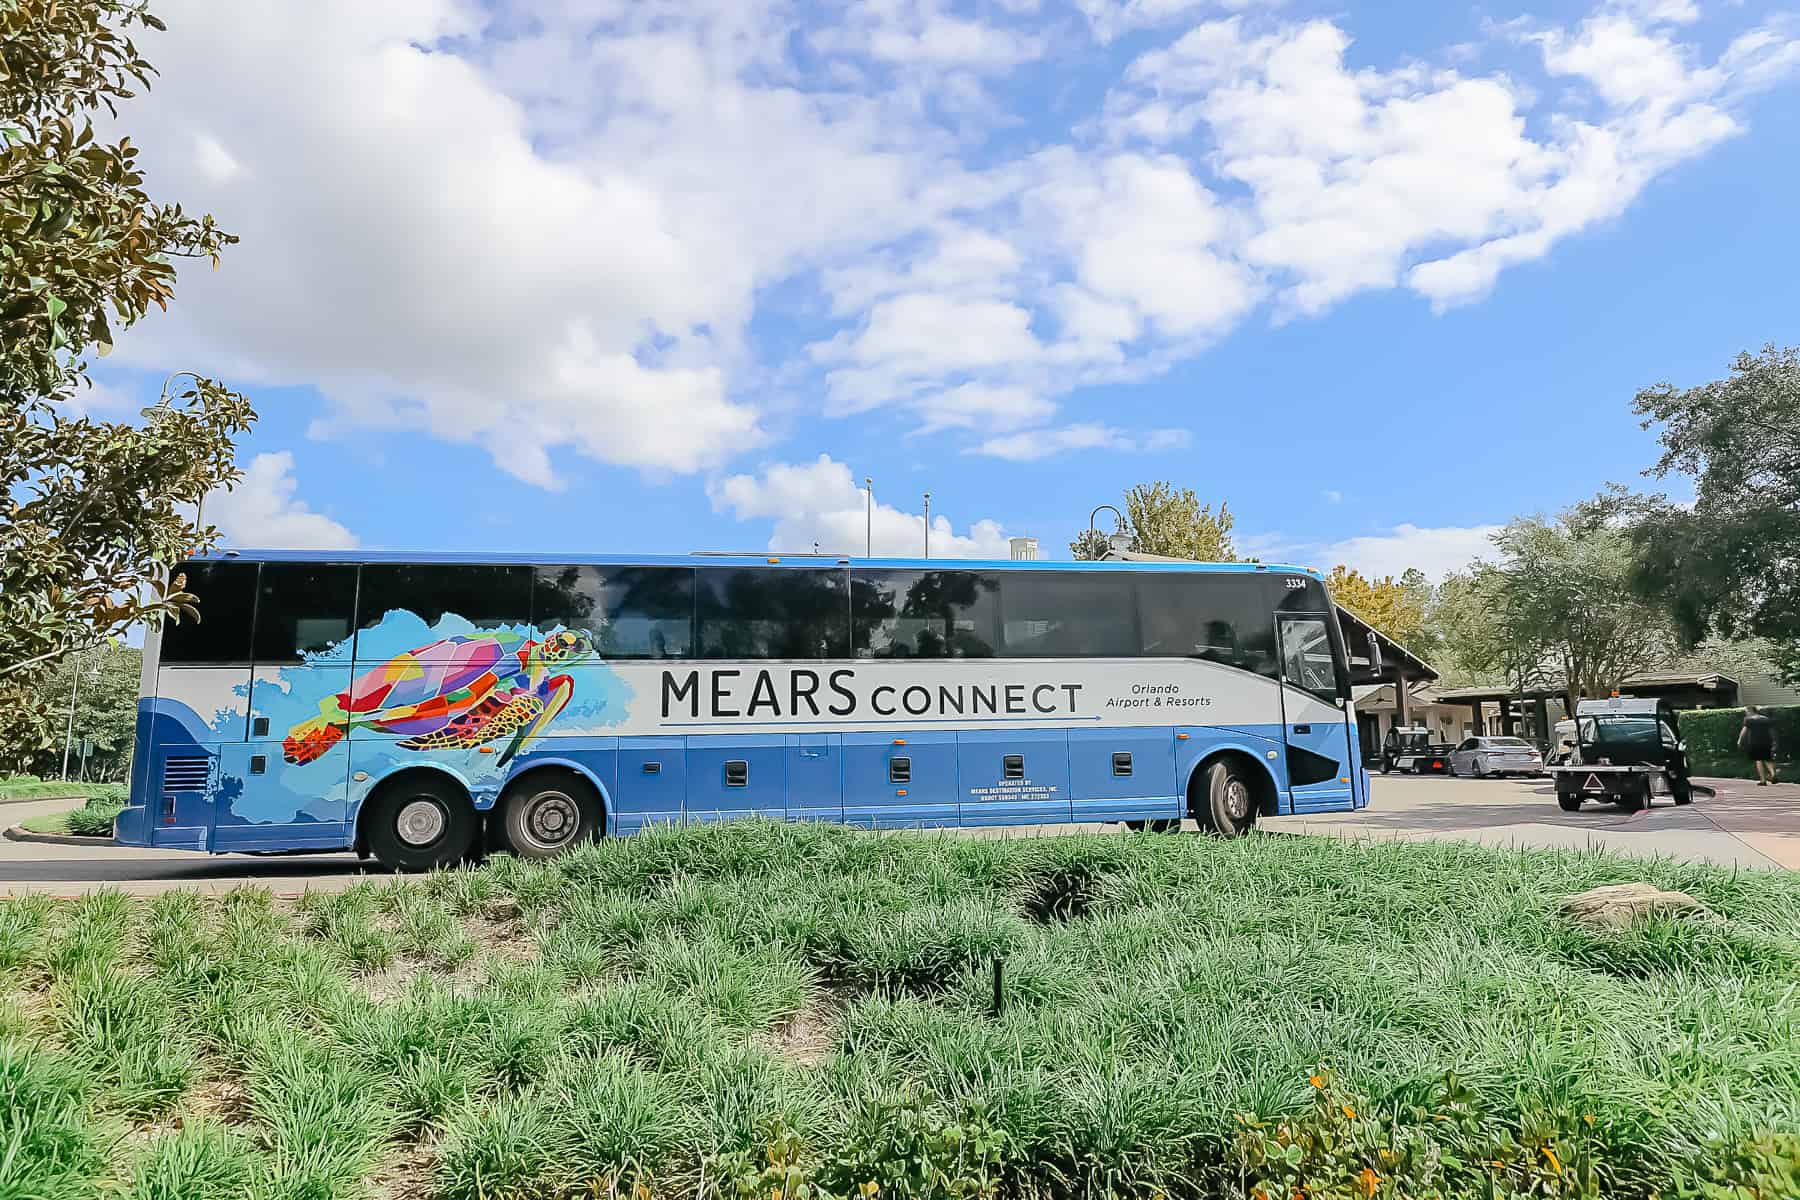 Mears Connect Bus picking up guests to take them to MCO airport. 